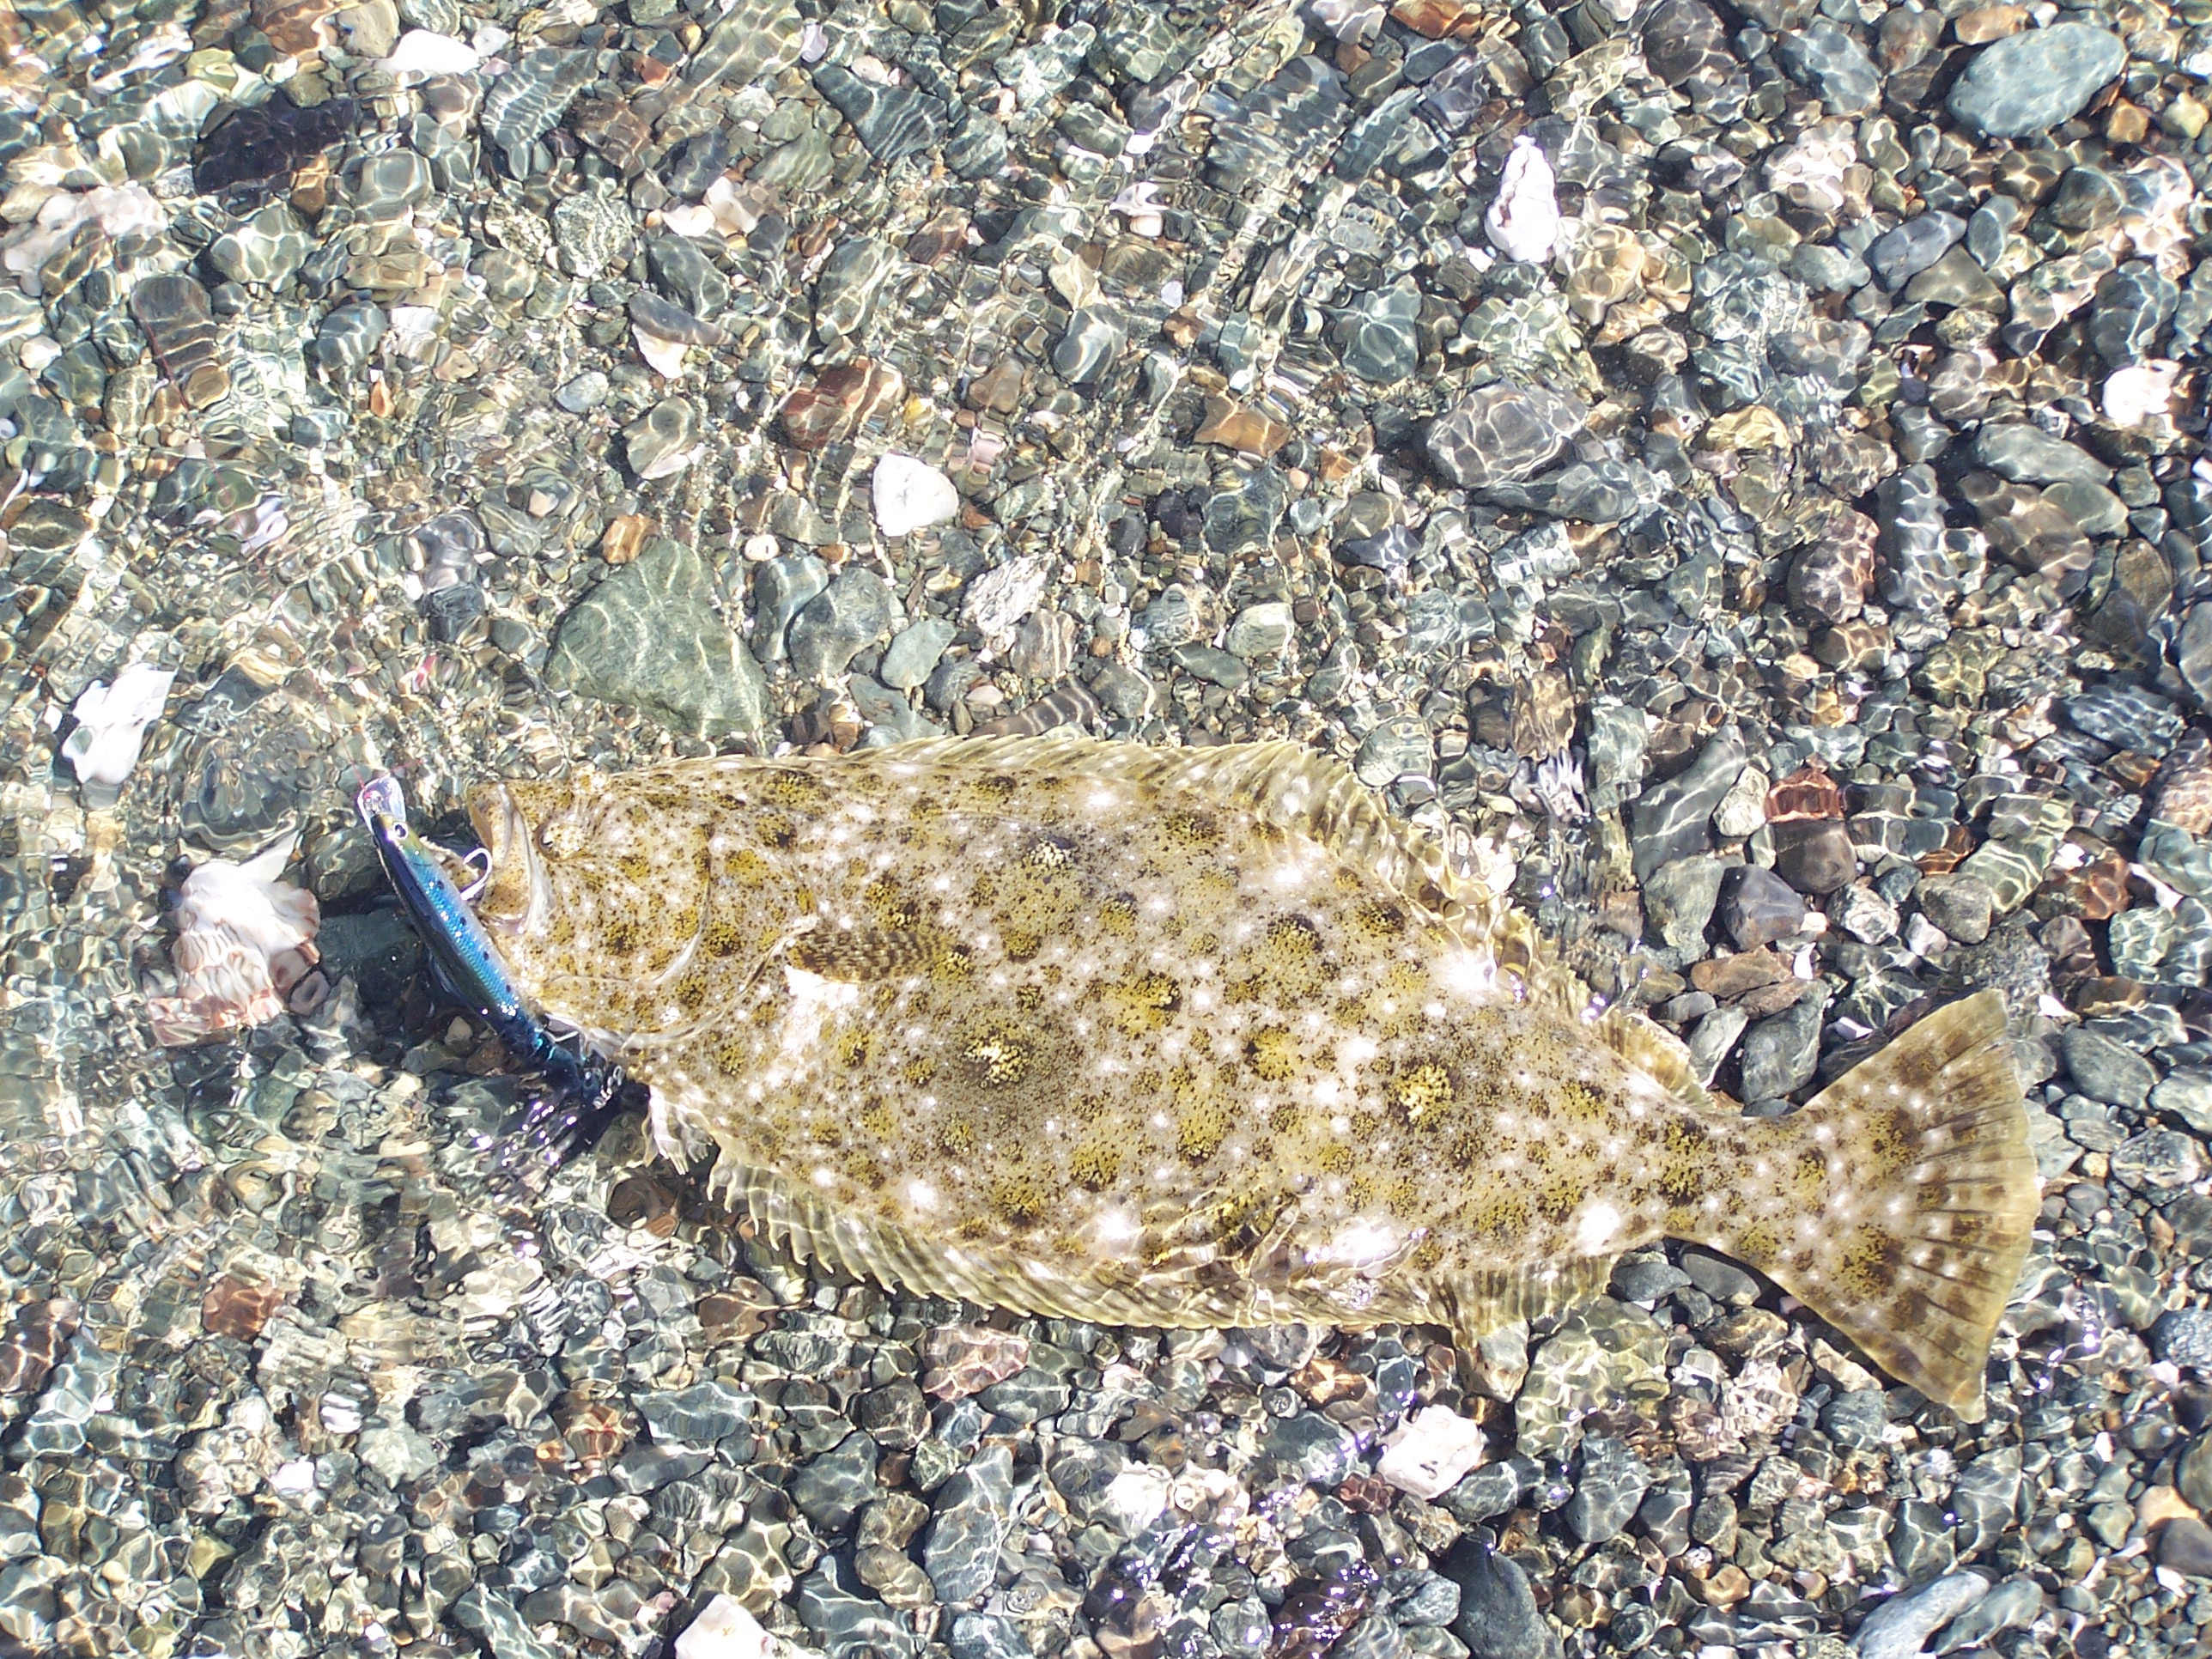 Finding Halibut at the Beach